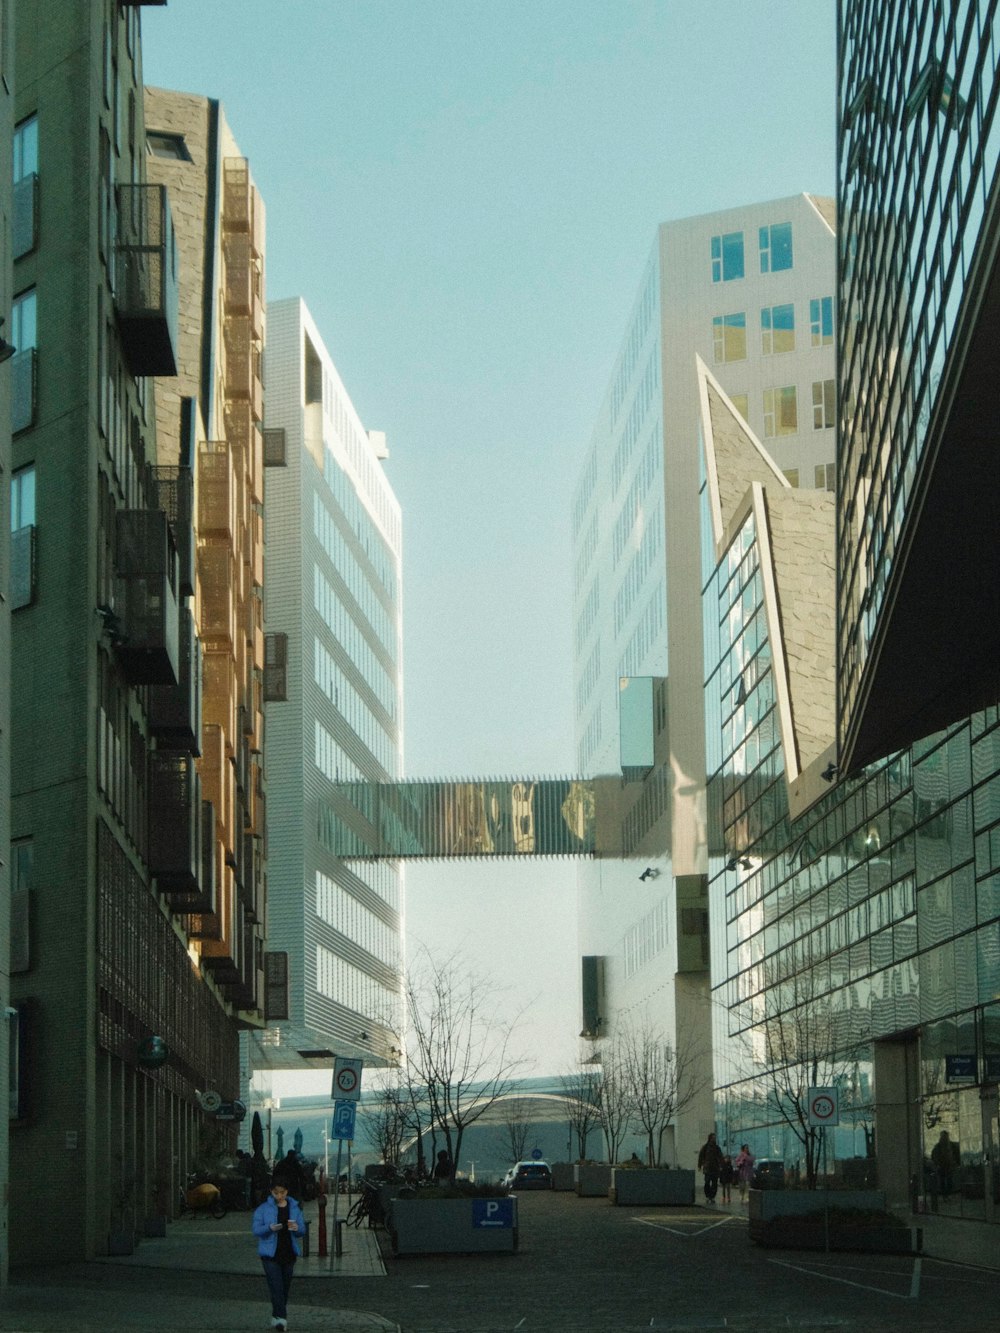 a couple of people walking down a street next to tall buildings